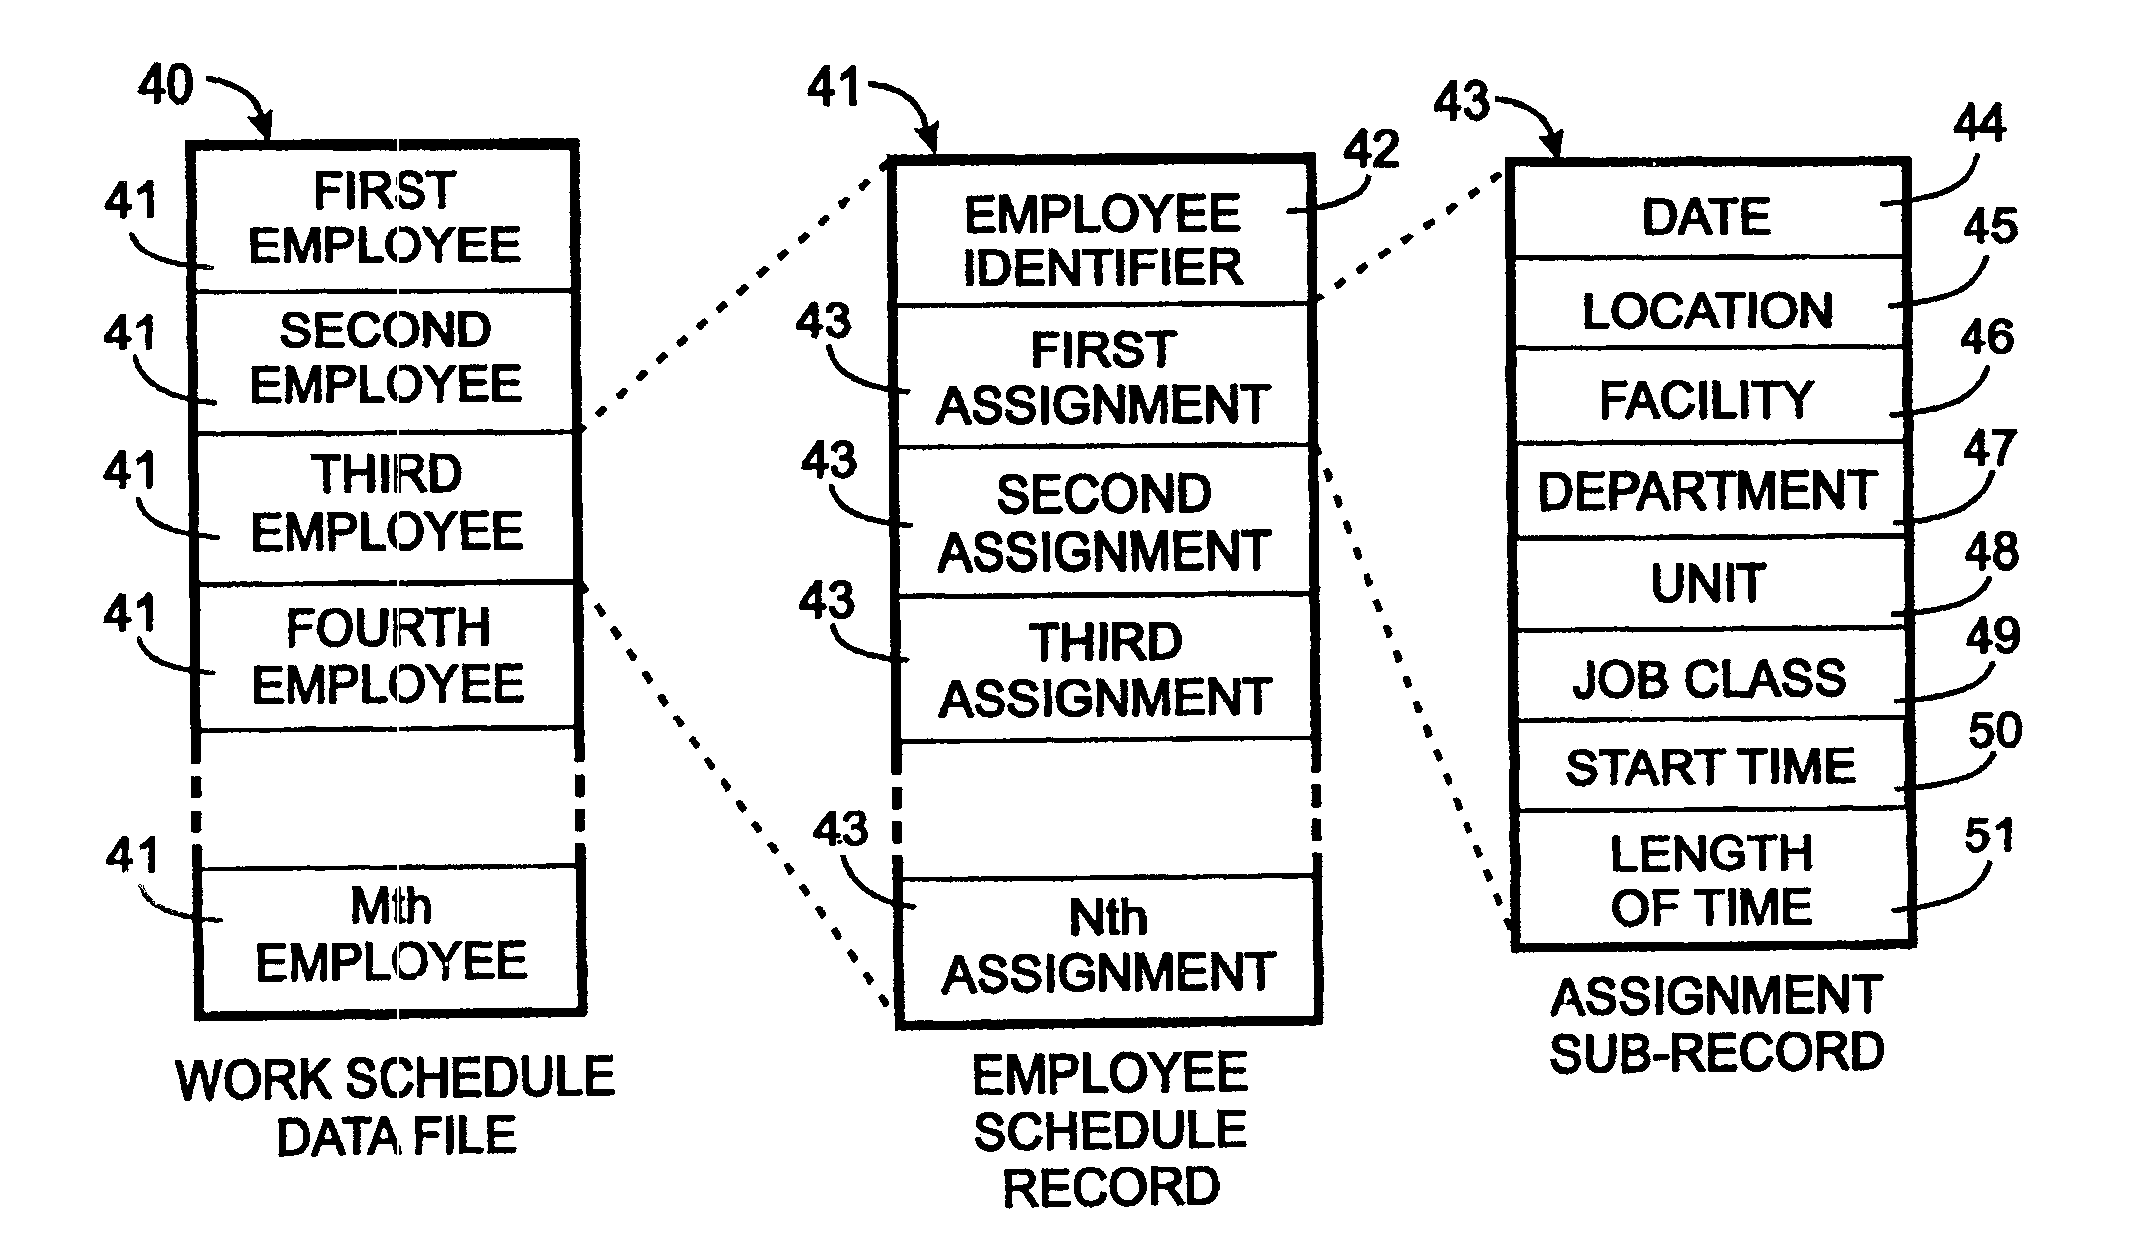 Menu Based Scheduling Process For An Employee Time and Attendance Recording System